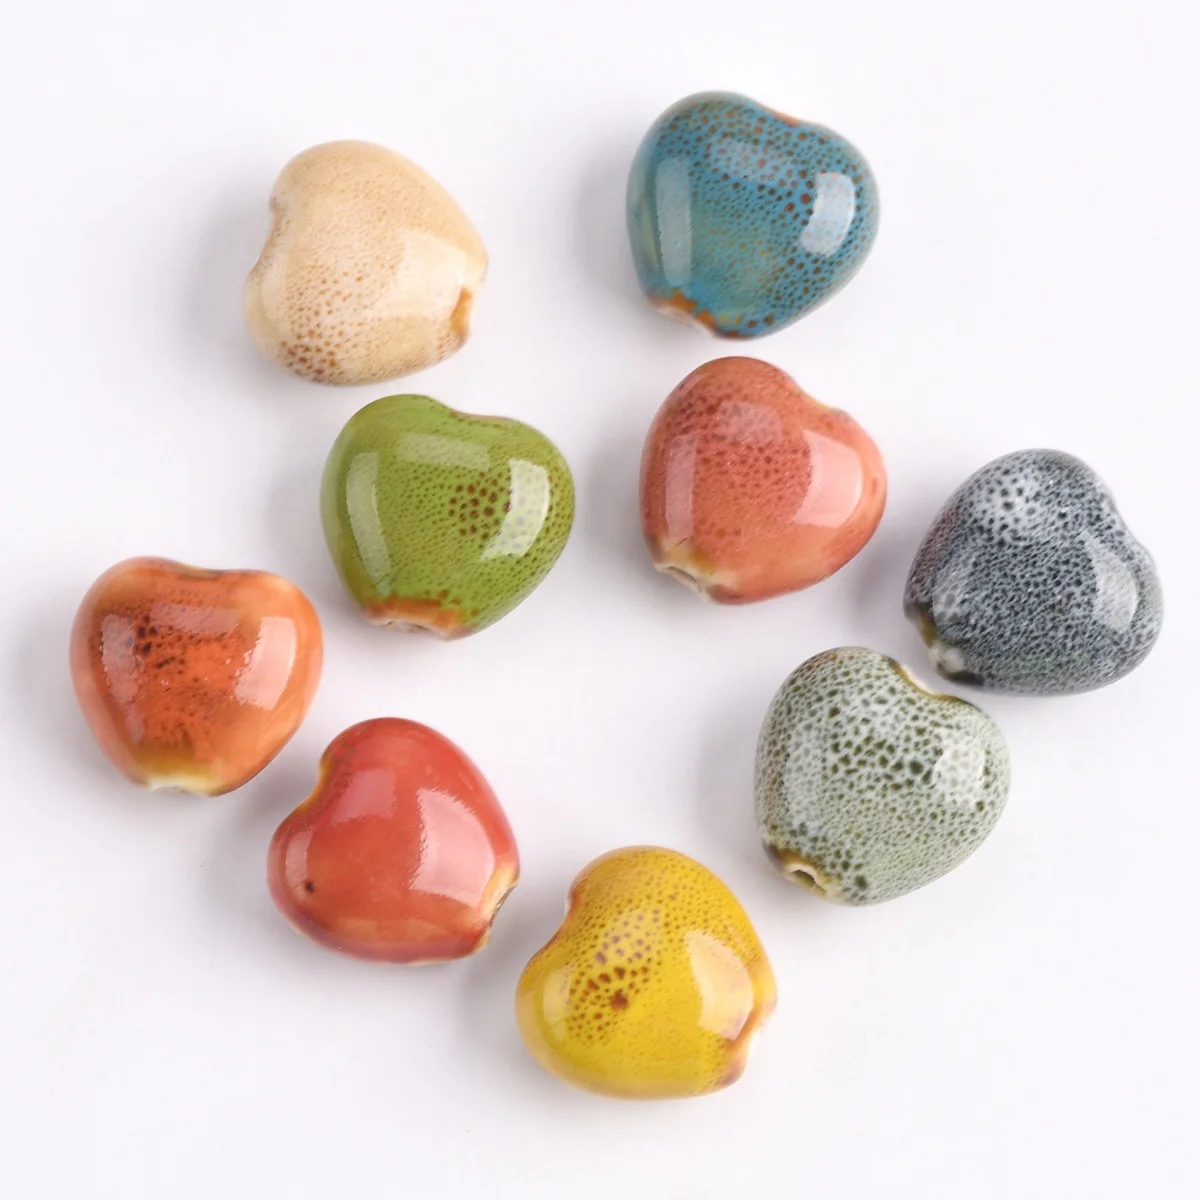 10pcs Fat Heart 16x15mm Handmade Fancy Glaze Ceramic Porcelain Loose Spacer Beads Lot For Jewelry Making DIY Findings